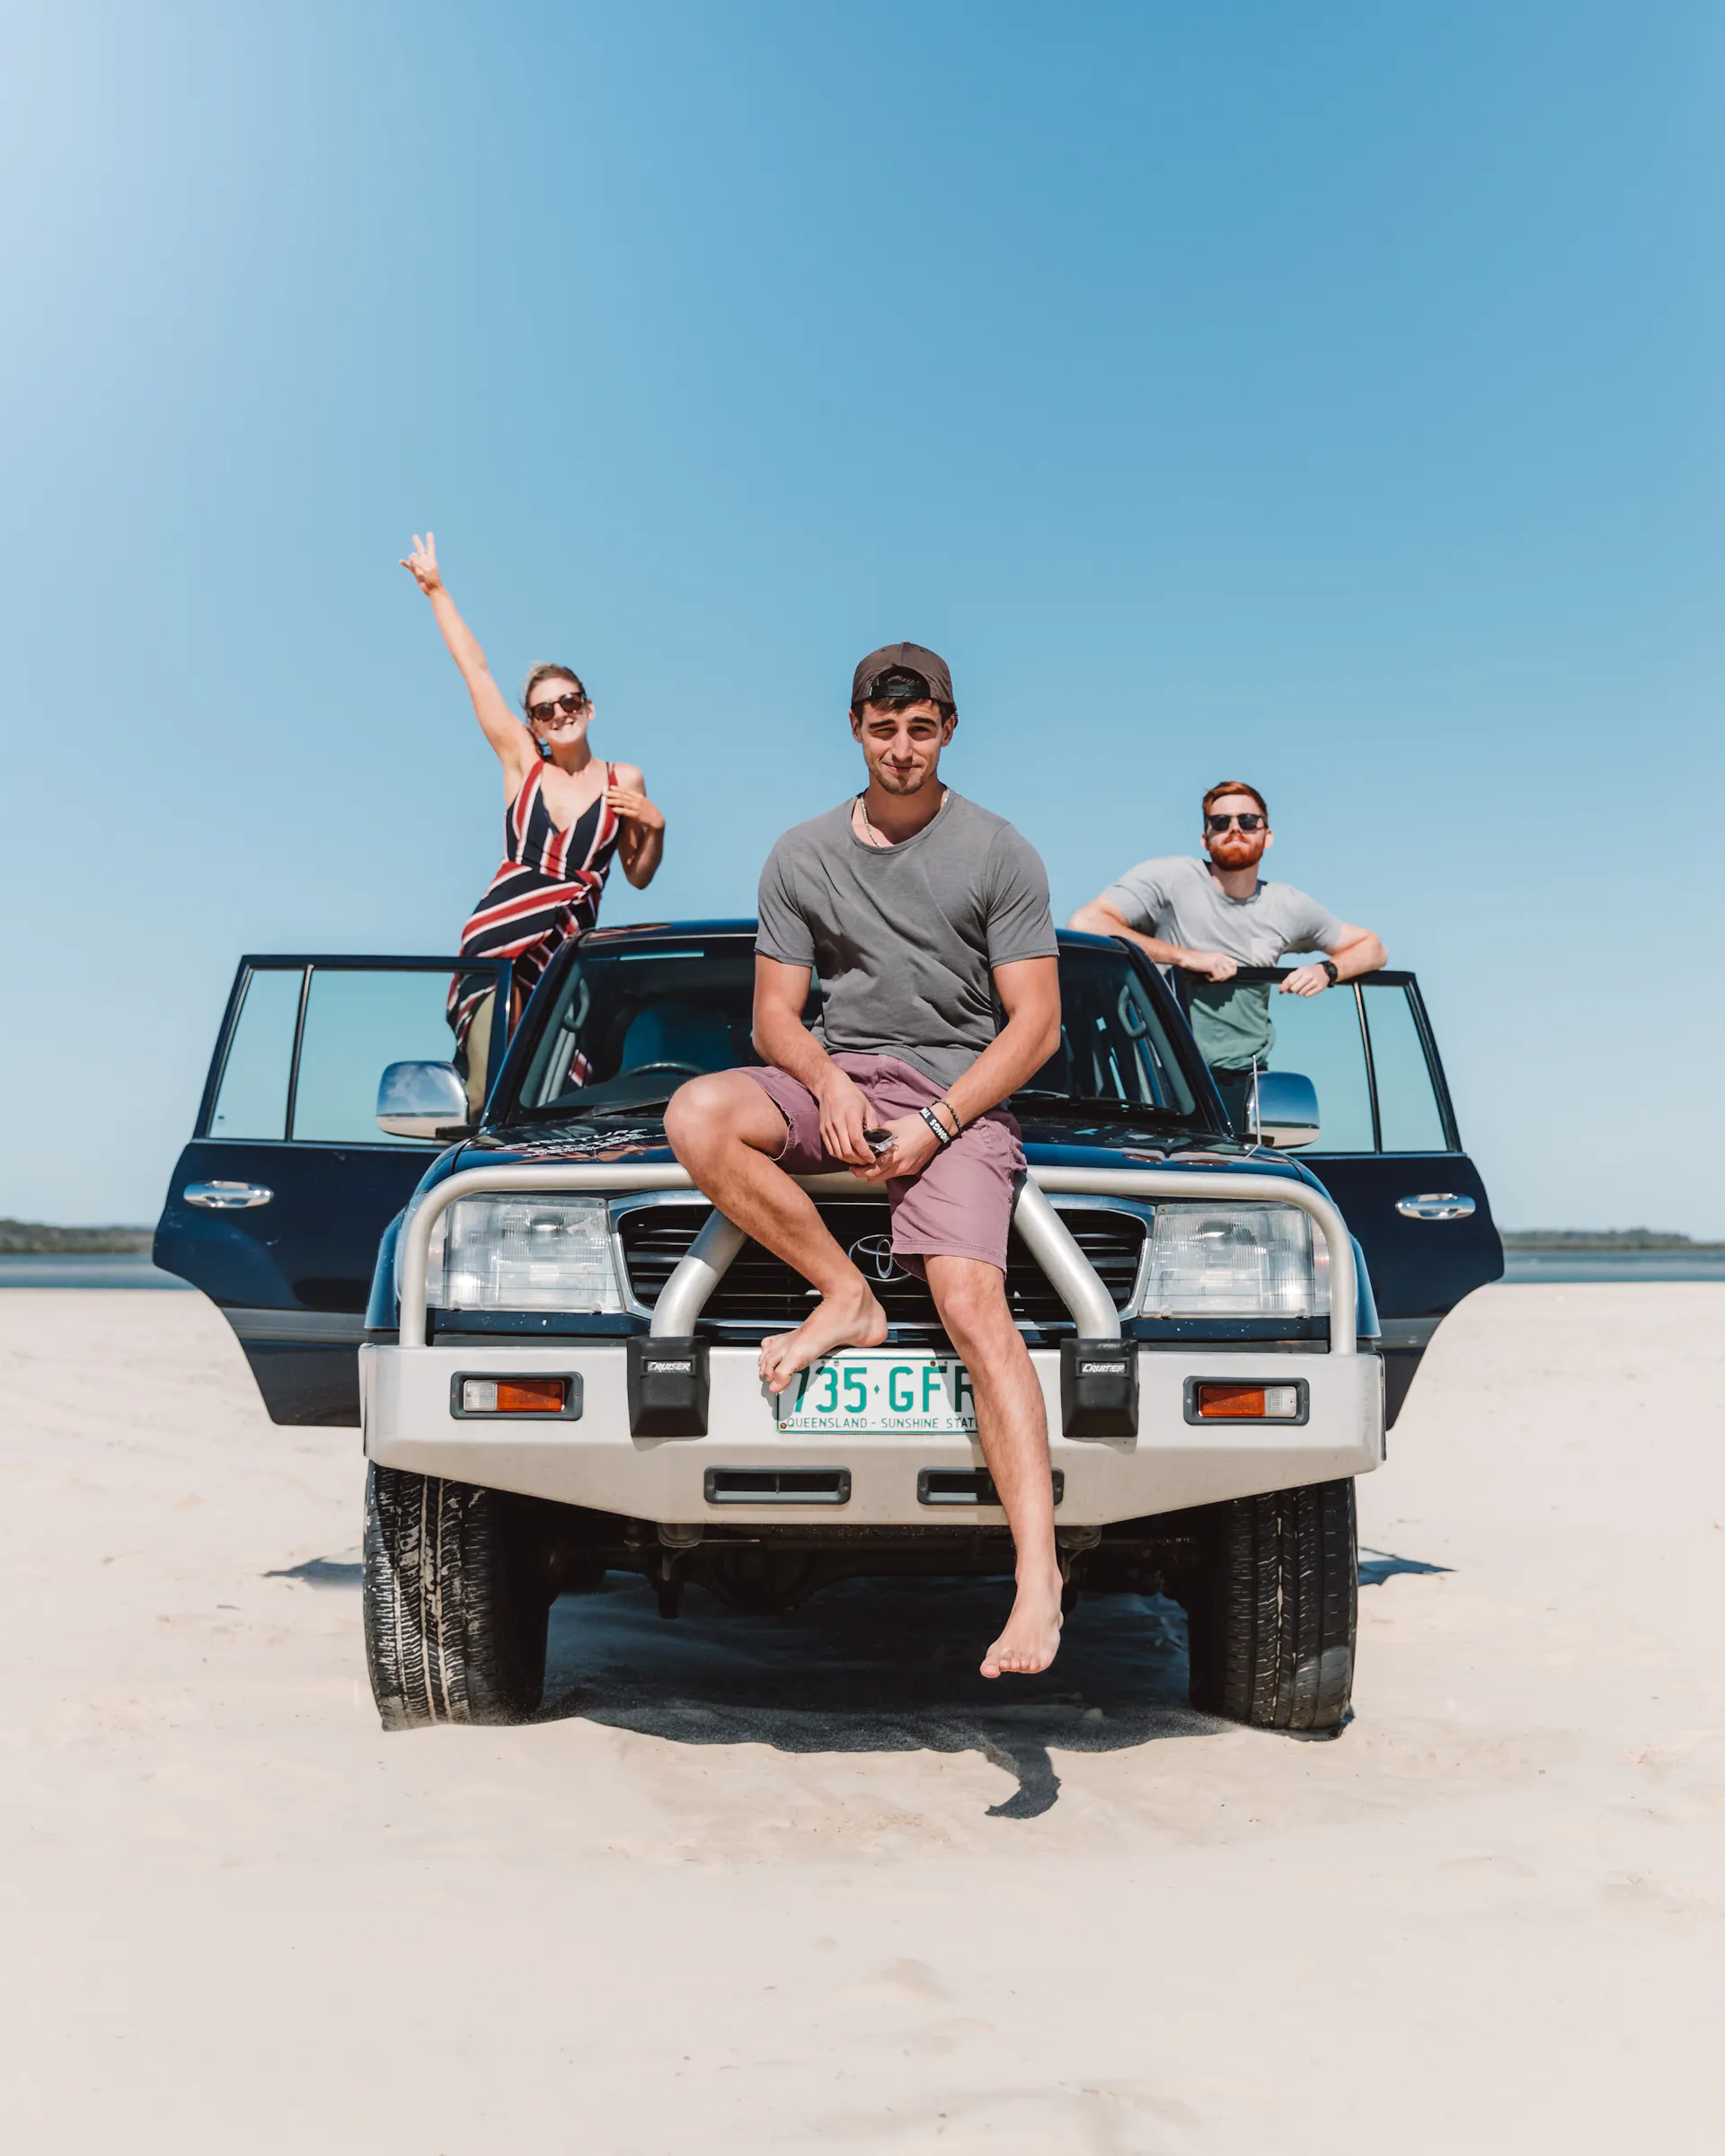 The best way to see Fraser Island is by exploring at your own pace in one of our 4wd's!